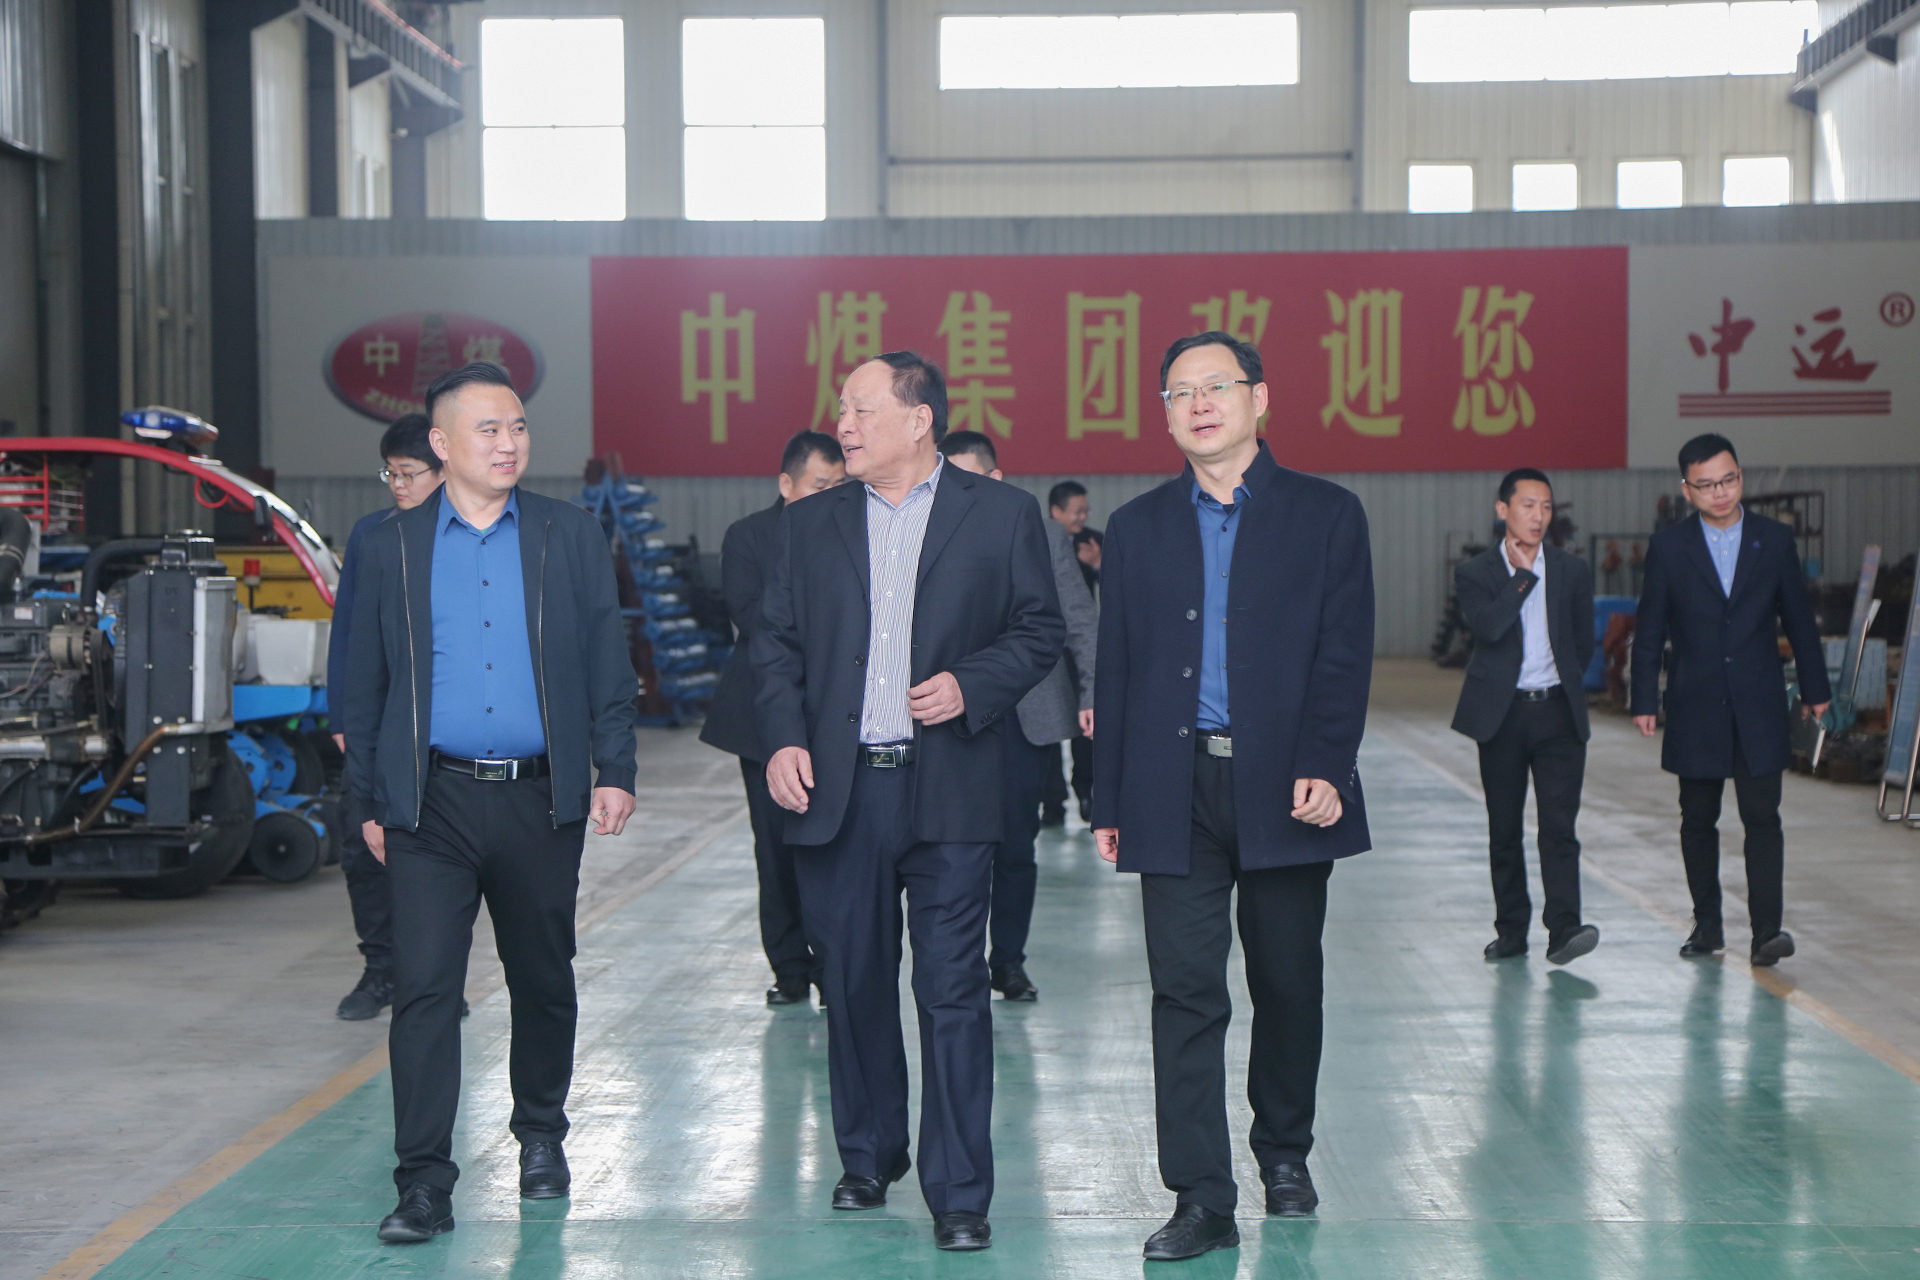 Warmly Welcome The Leaders Of Jining Technician College To Visit China Coal Group For Inspection And Cooperation